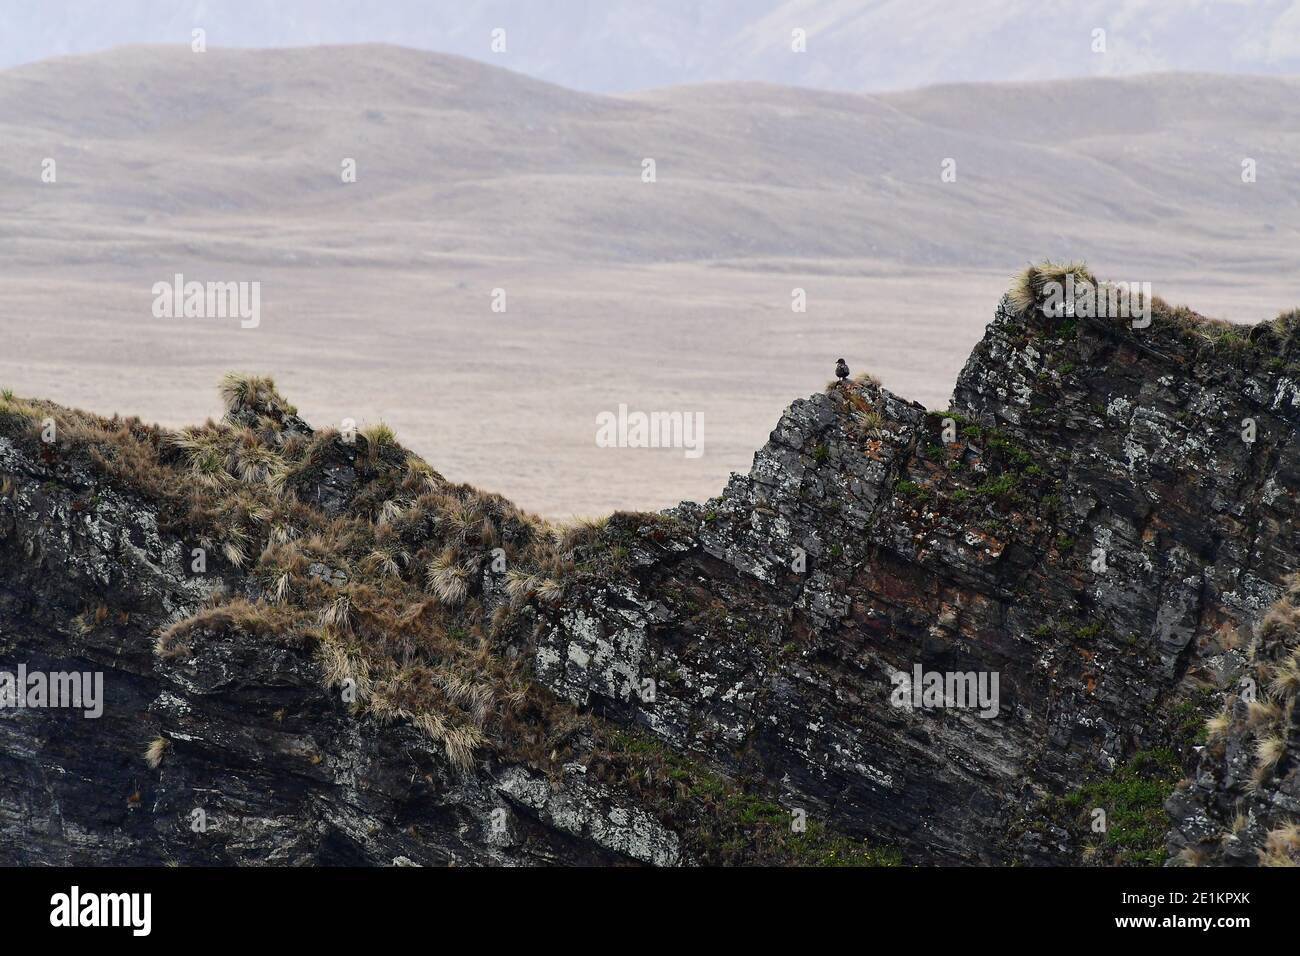 Brown skua (Stercorarius antarcticus) perched on immense, rugged mountainside cliff edges of South Georgia in the Southern Atlantic Ocean. Stock Photo